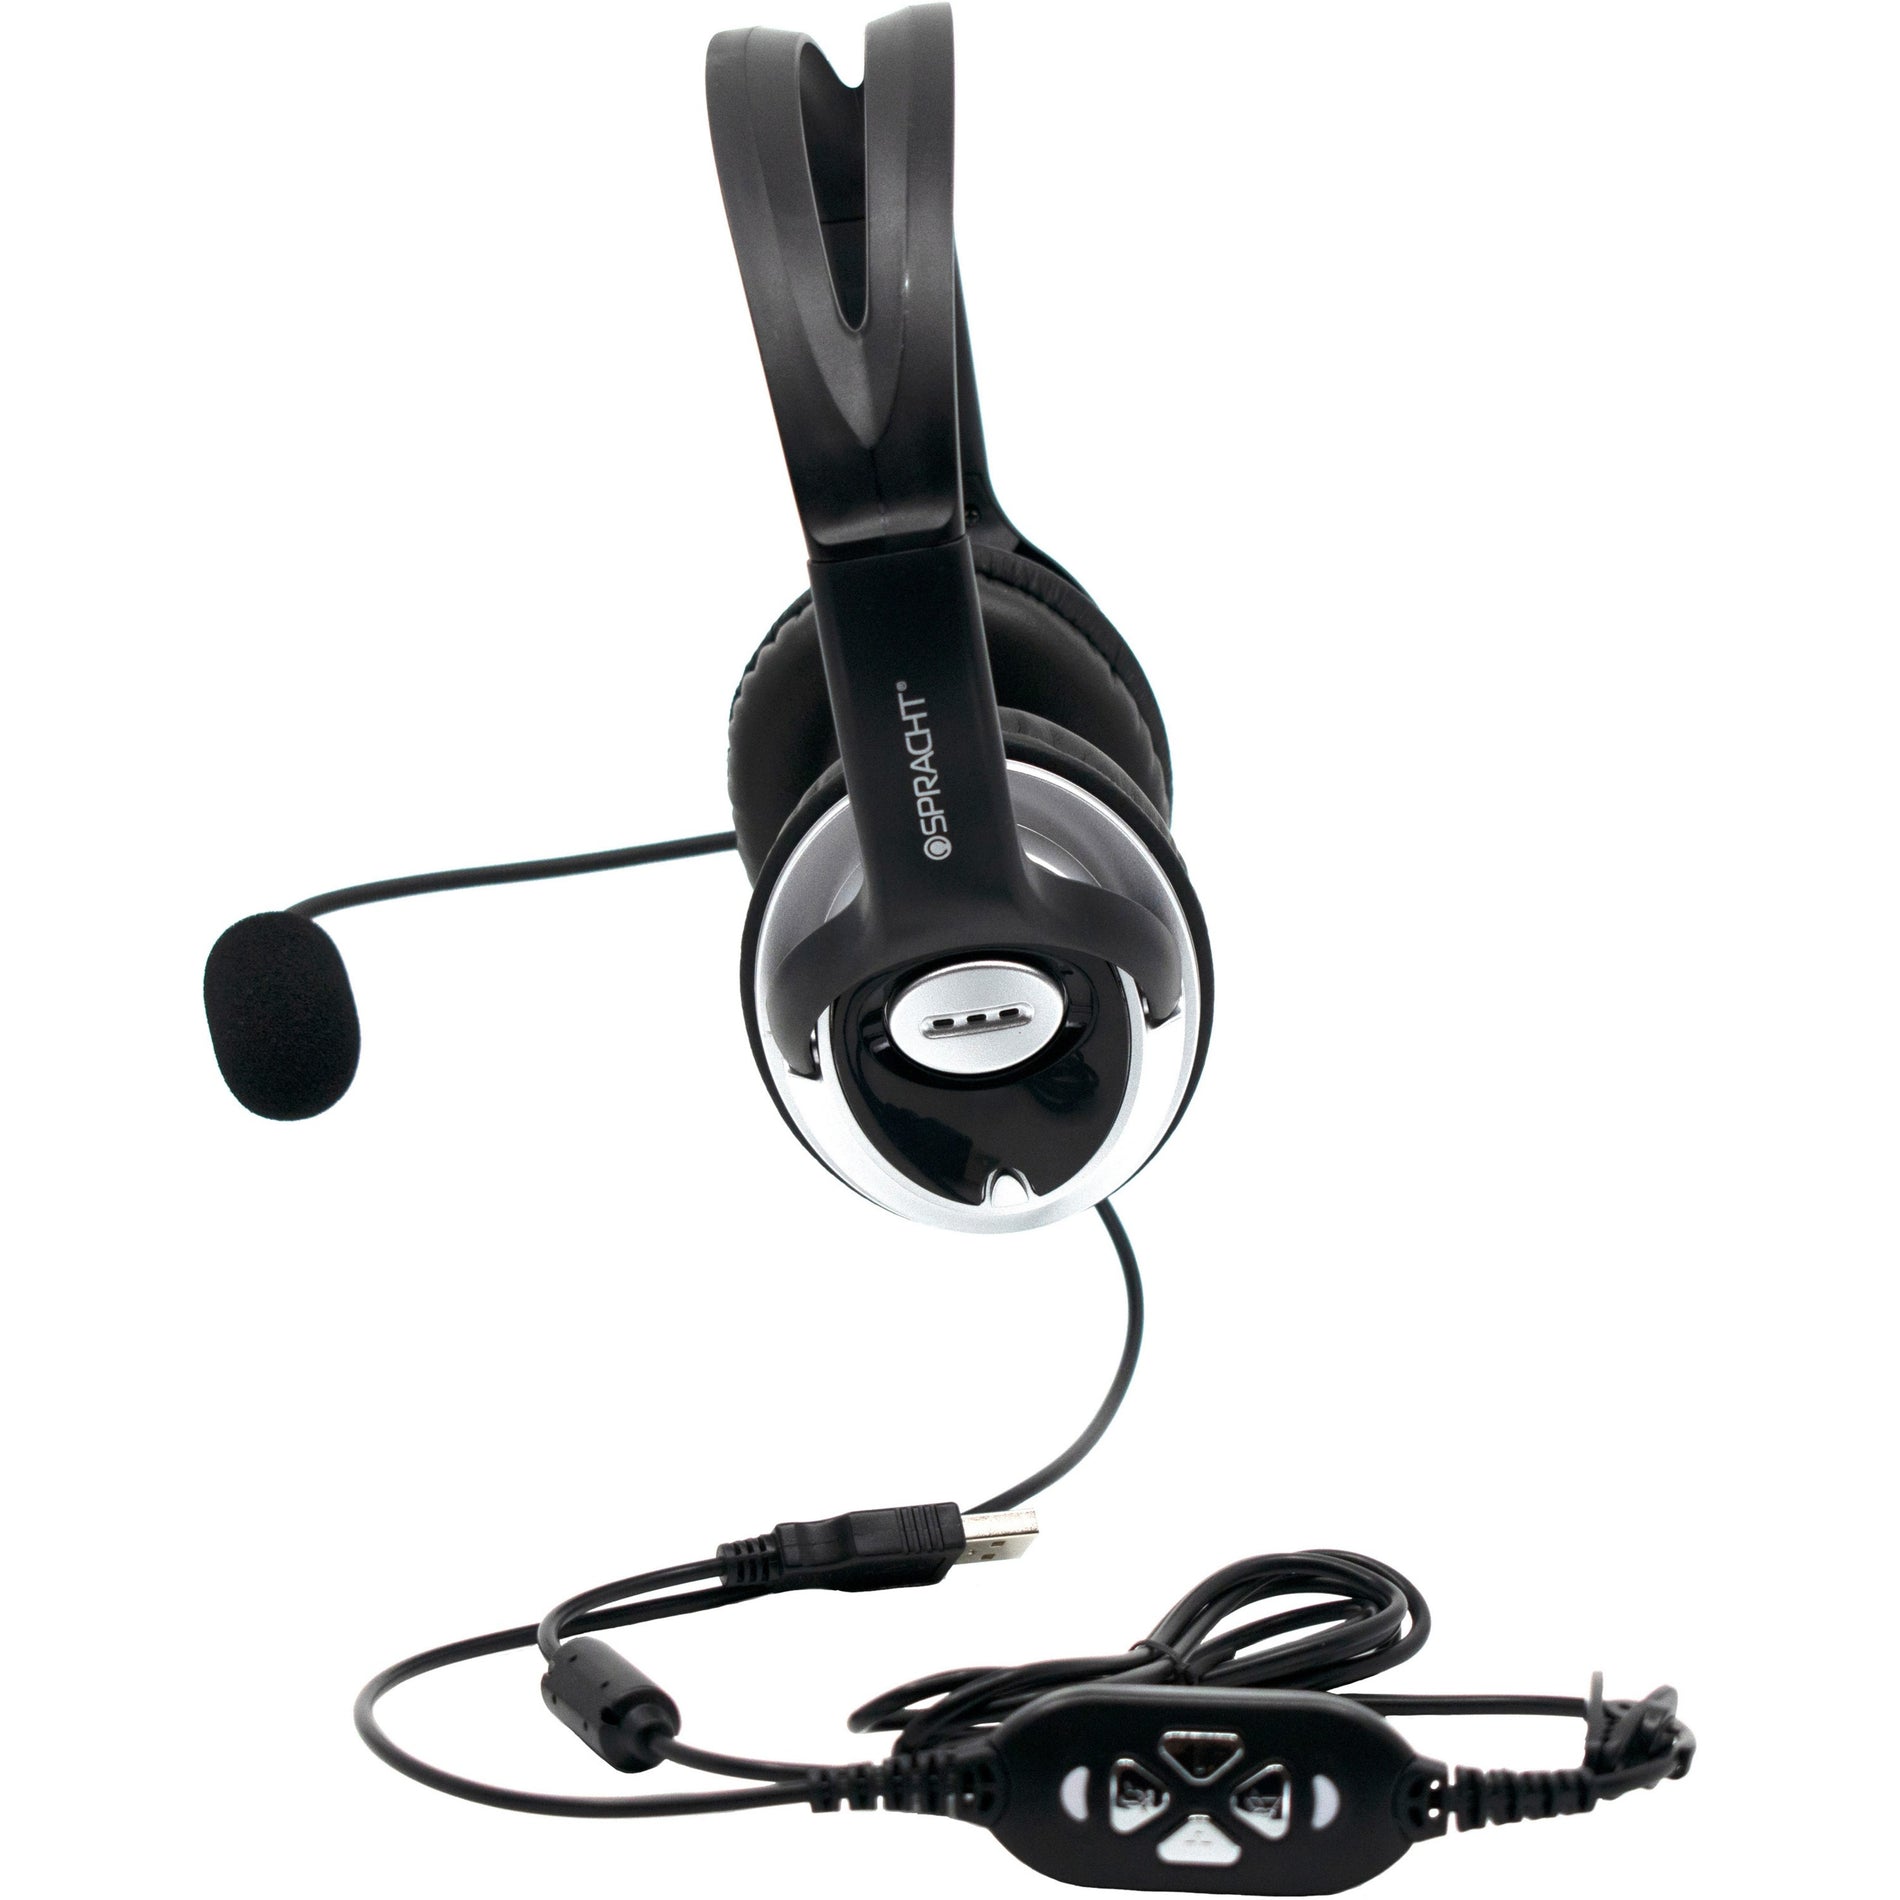 Spracht ZUM-WD-USB-2 Headset, Comfortable, Noise Cancelling, USB Wired Stereo Headset